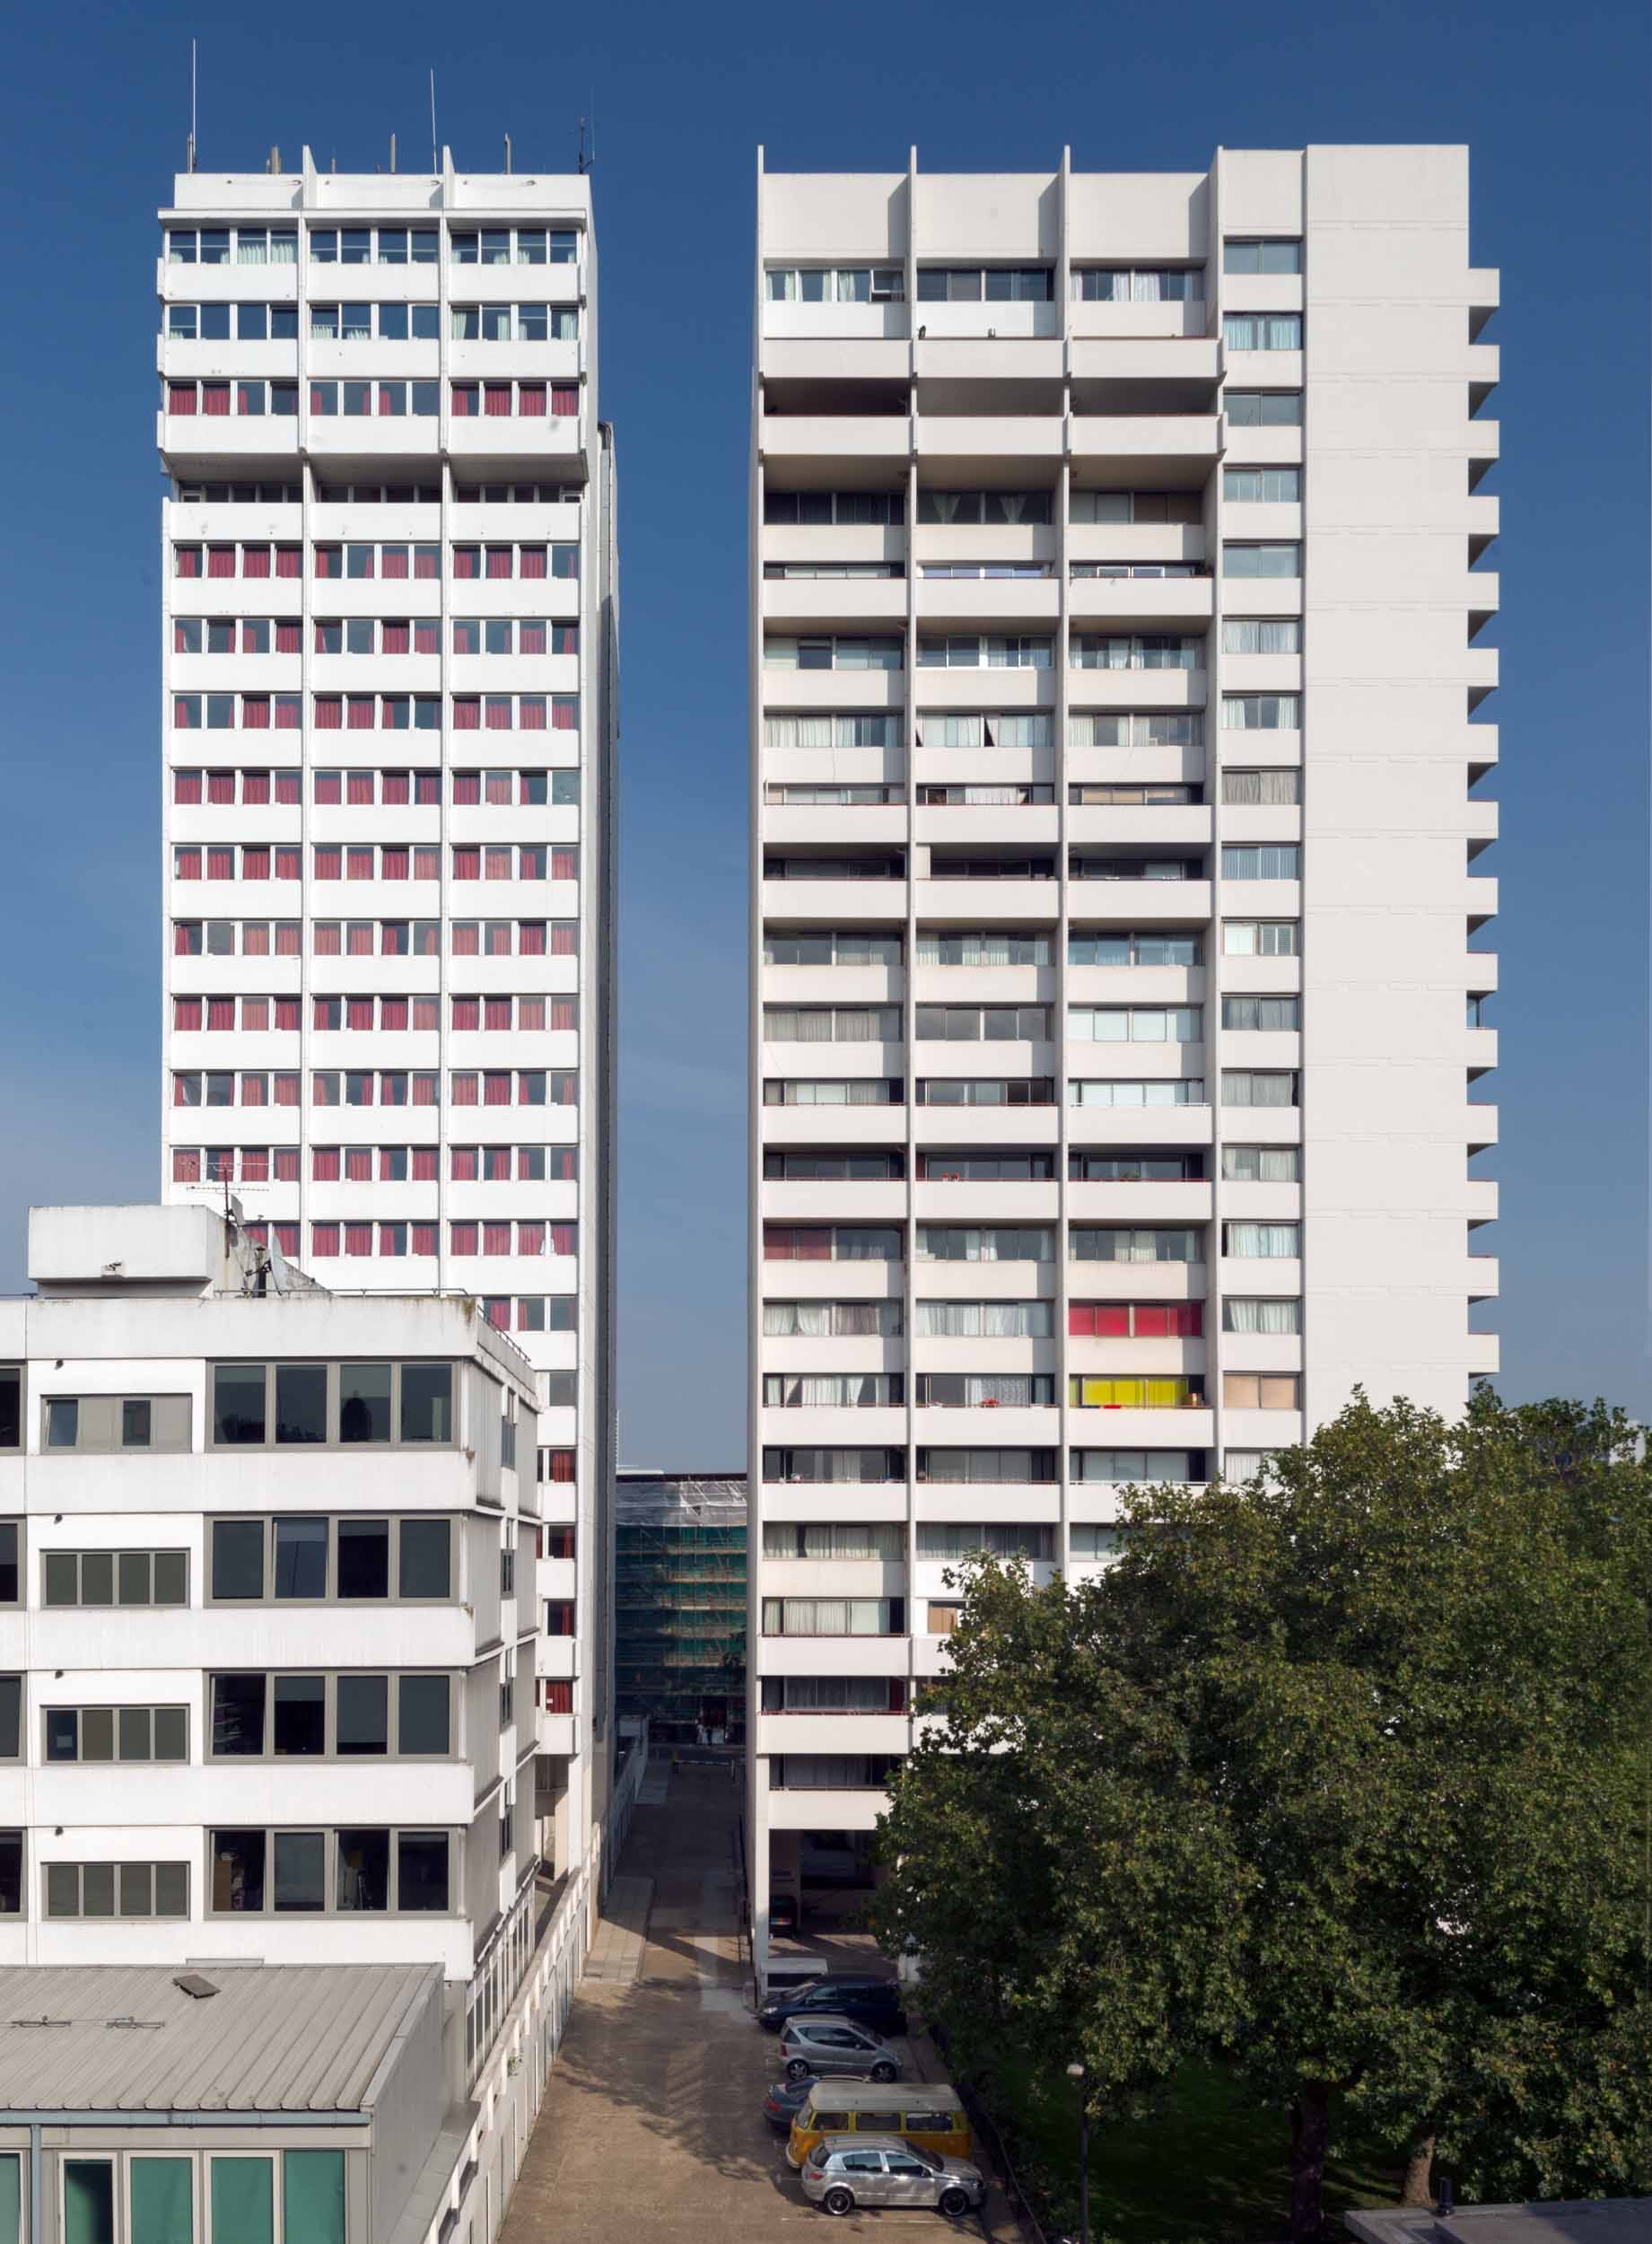 University of Westminster student housing tower at the Marylebone Road campus (left) and Luxborough Tower, looking east, 2014 (HEA photograph DP177602)